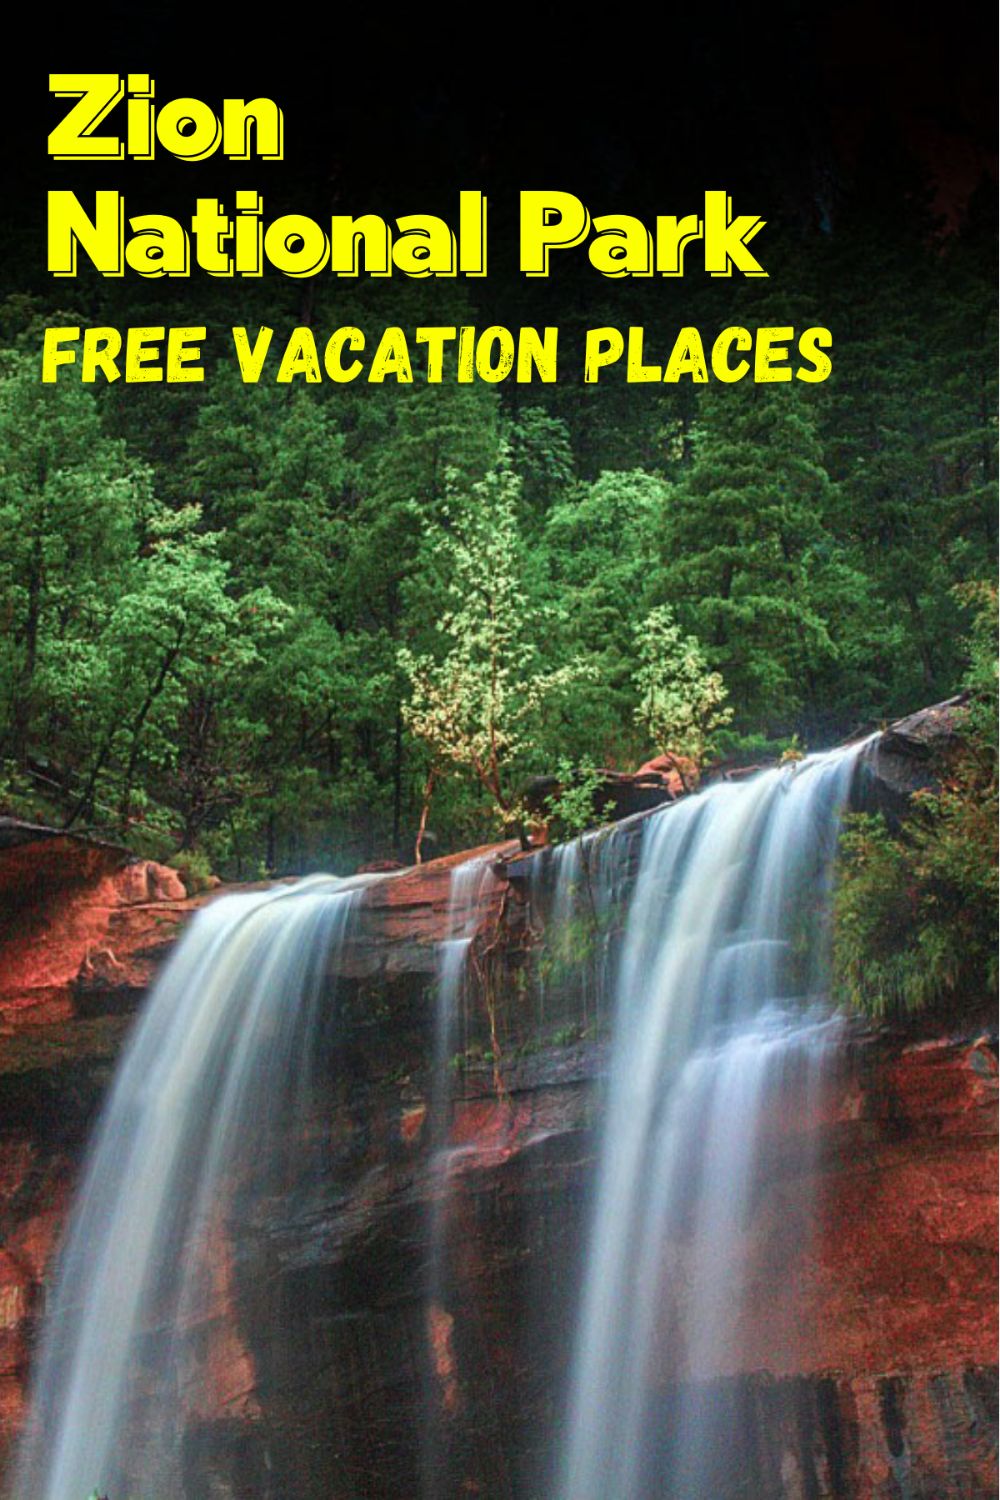 37 Free Campsites for Zion National Park (7)